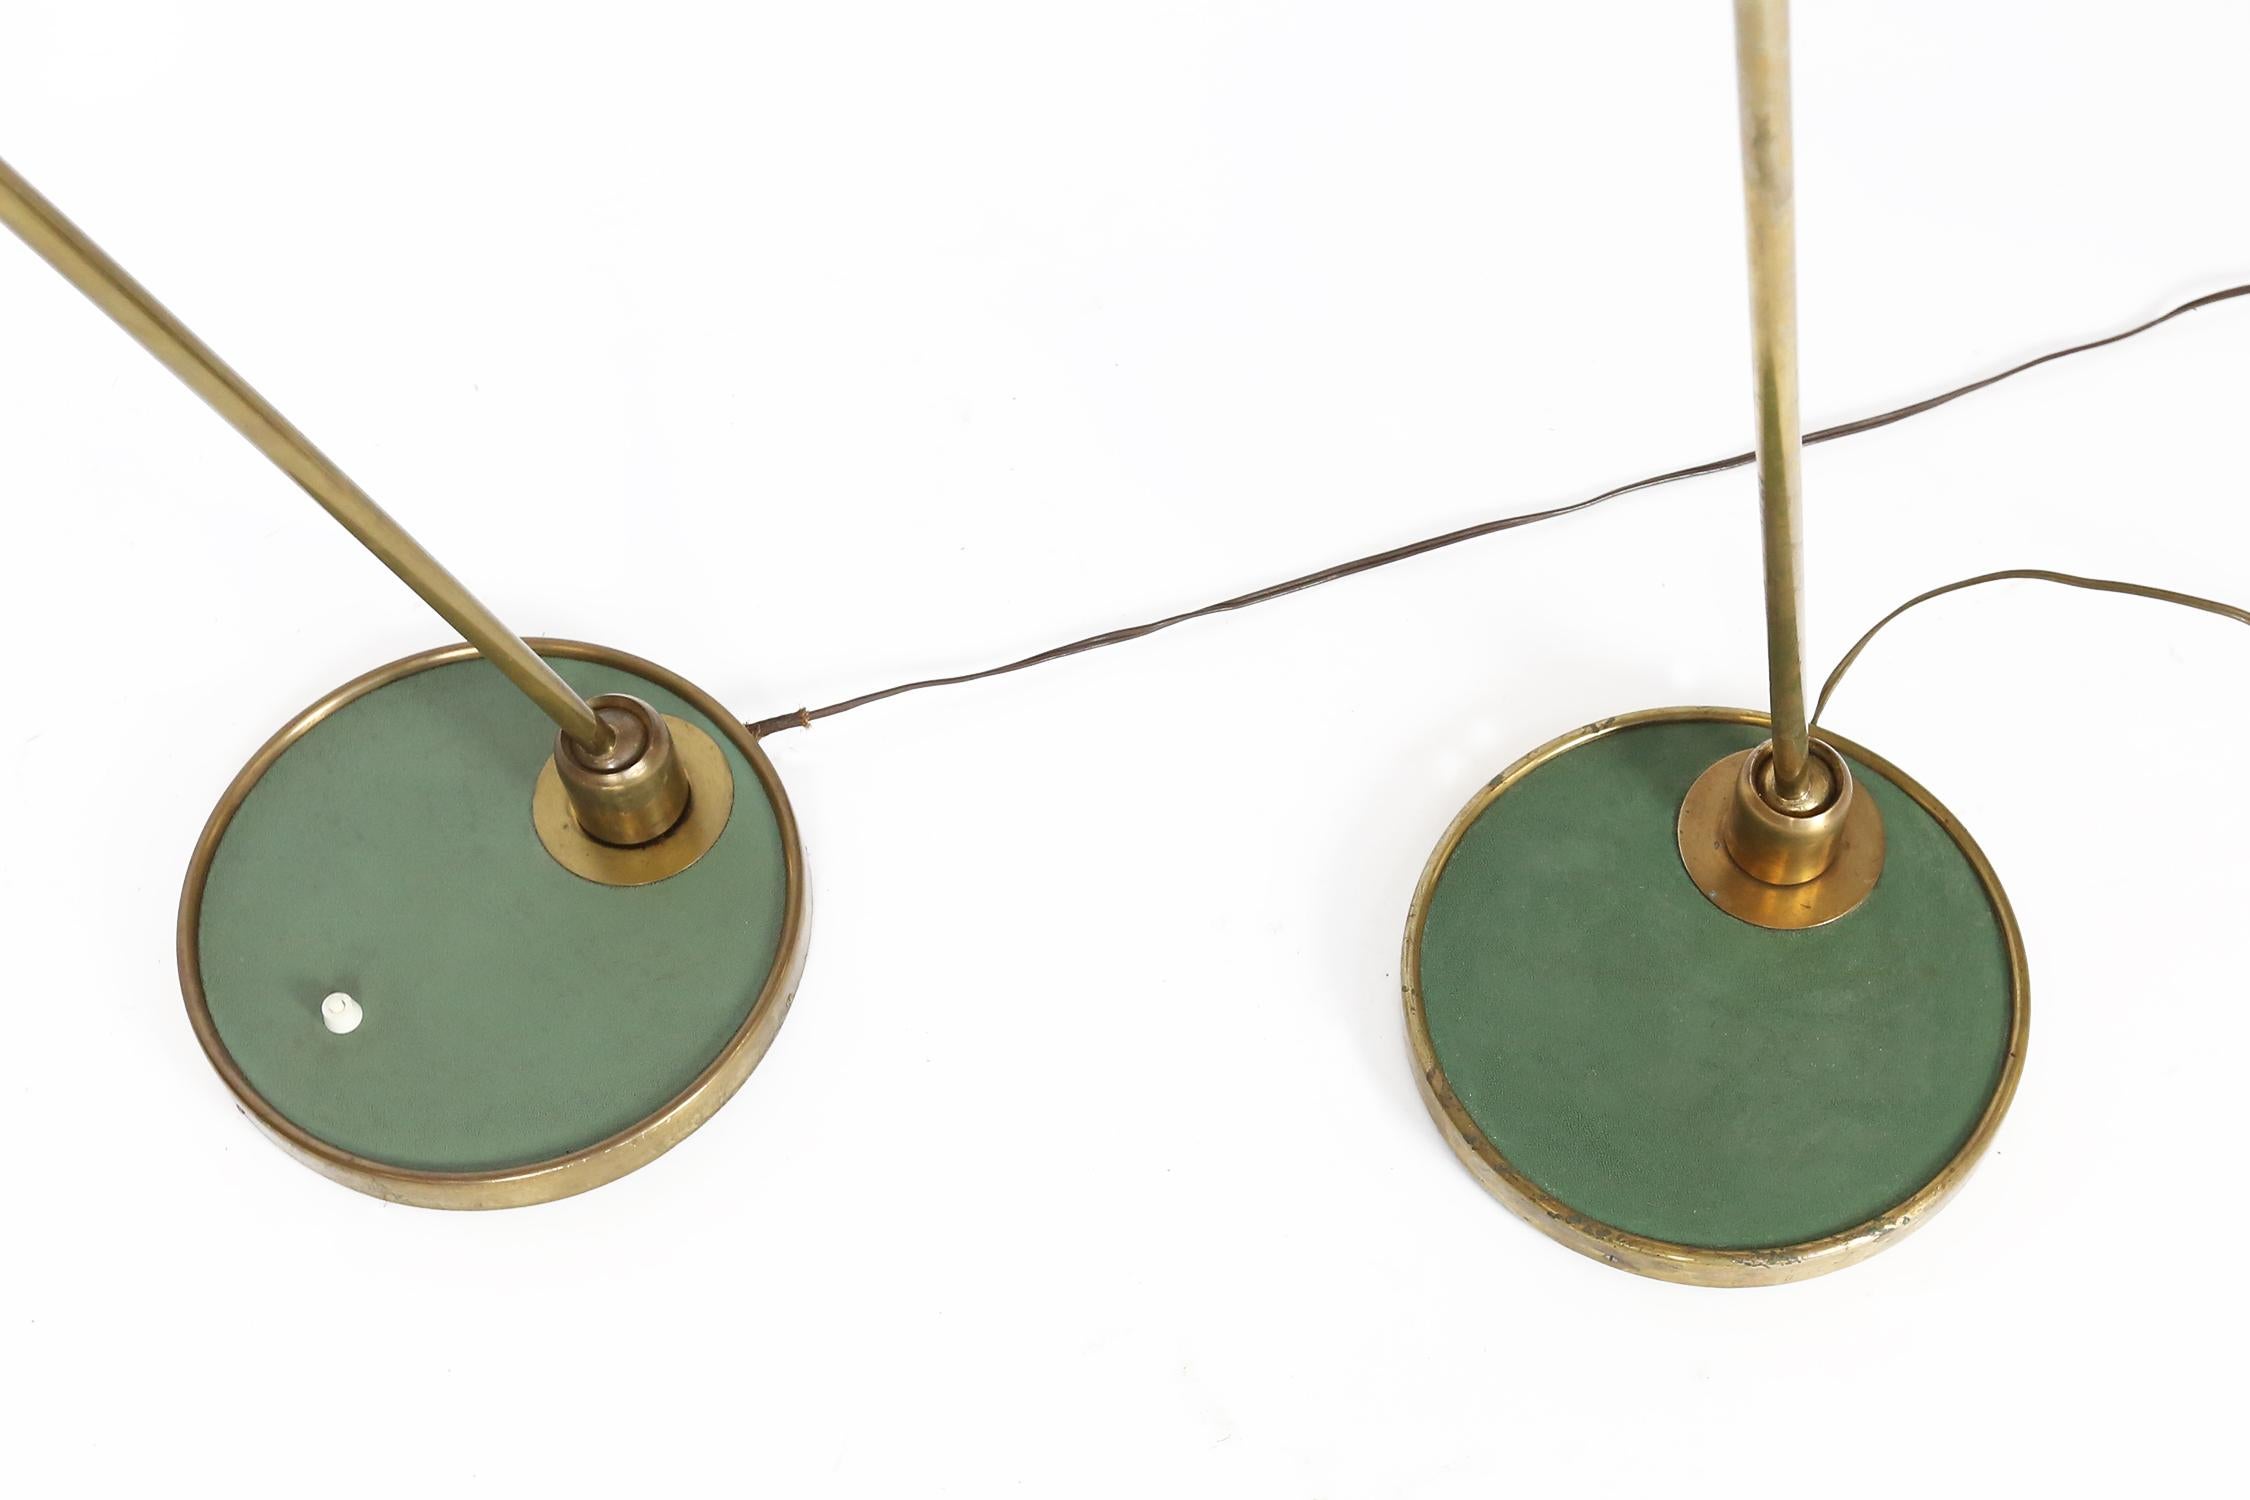 Brass French Maison Lunel Floor Lamps with Original Diabolo Shades, 1950s For Sale